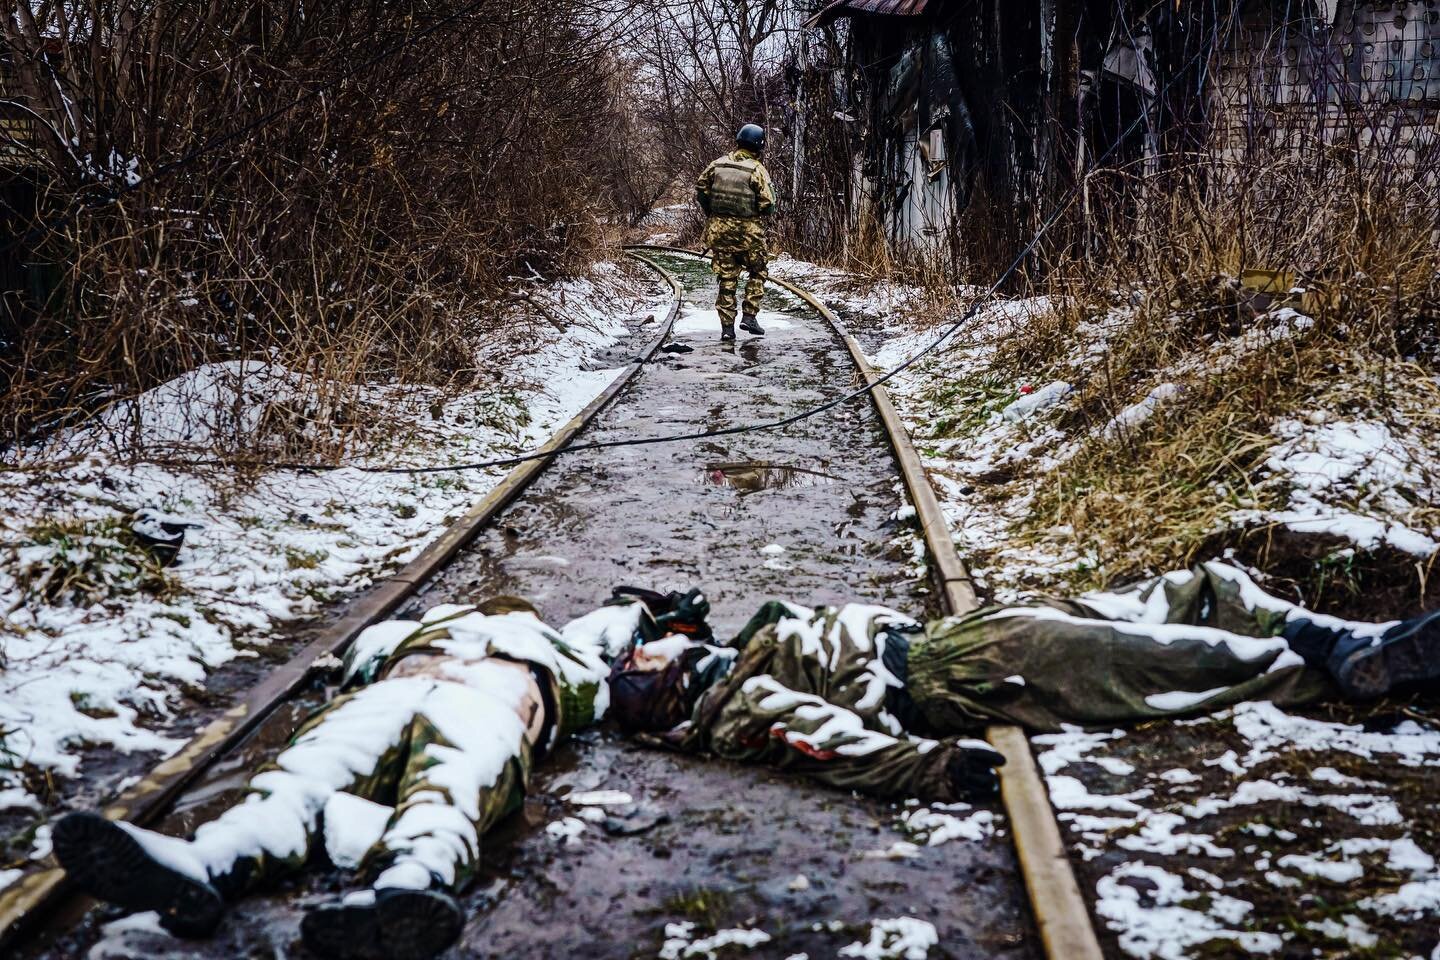 DISPATCHES: Day Six. Dead soldiers. A destroyed bridge. An icy river. Battle scars linger. People fleeing their besieged town on foot. A man and a woman watches people leave but turns back. Ukraine town of Irpin on the front lines prepares to battle 